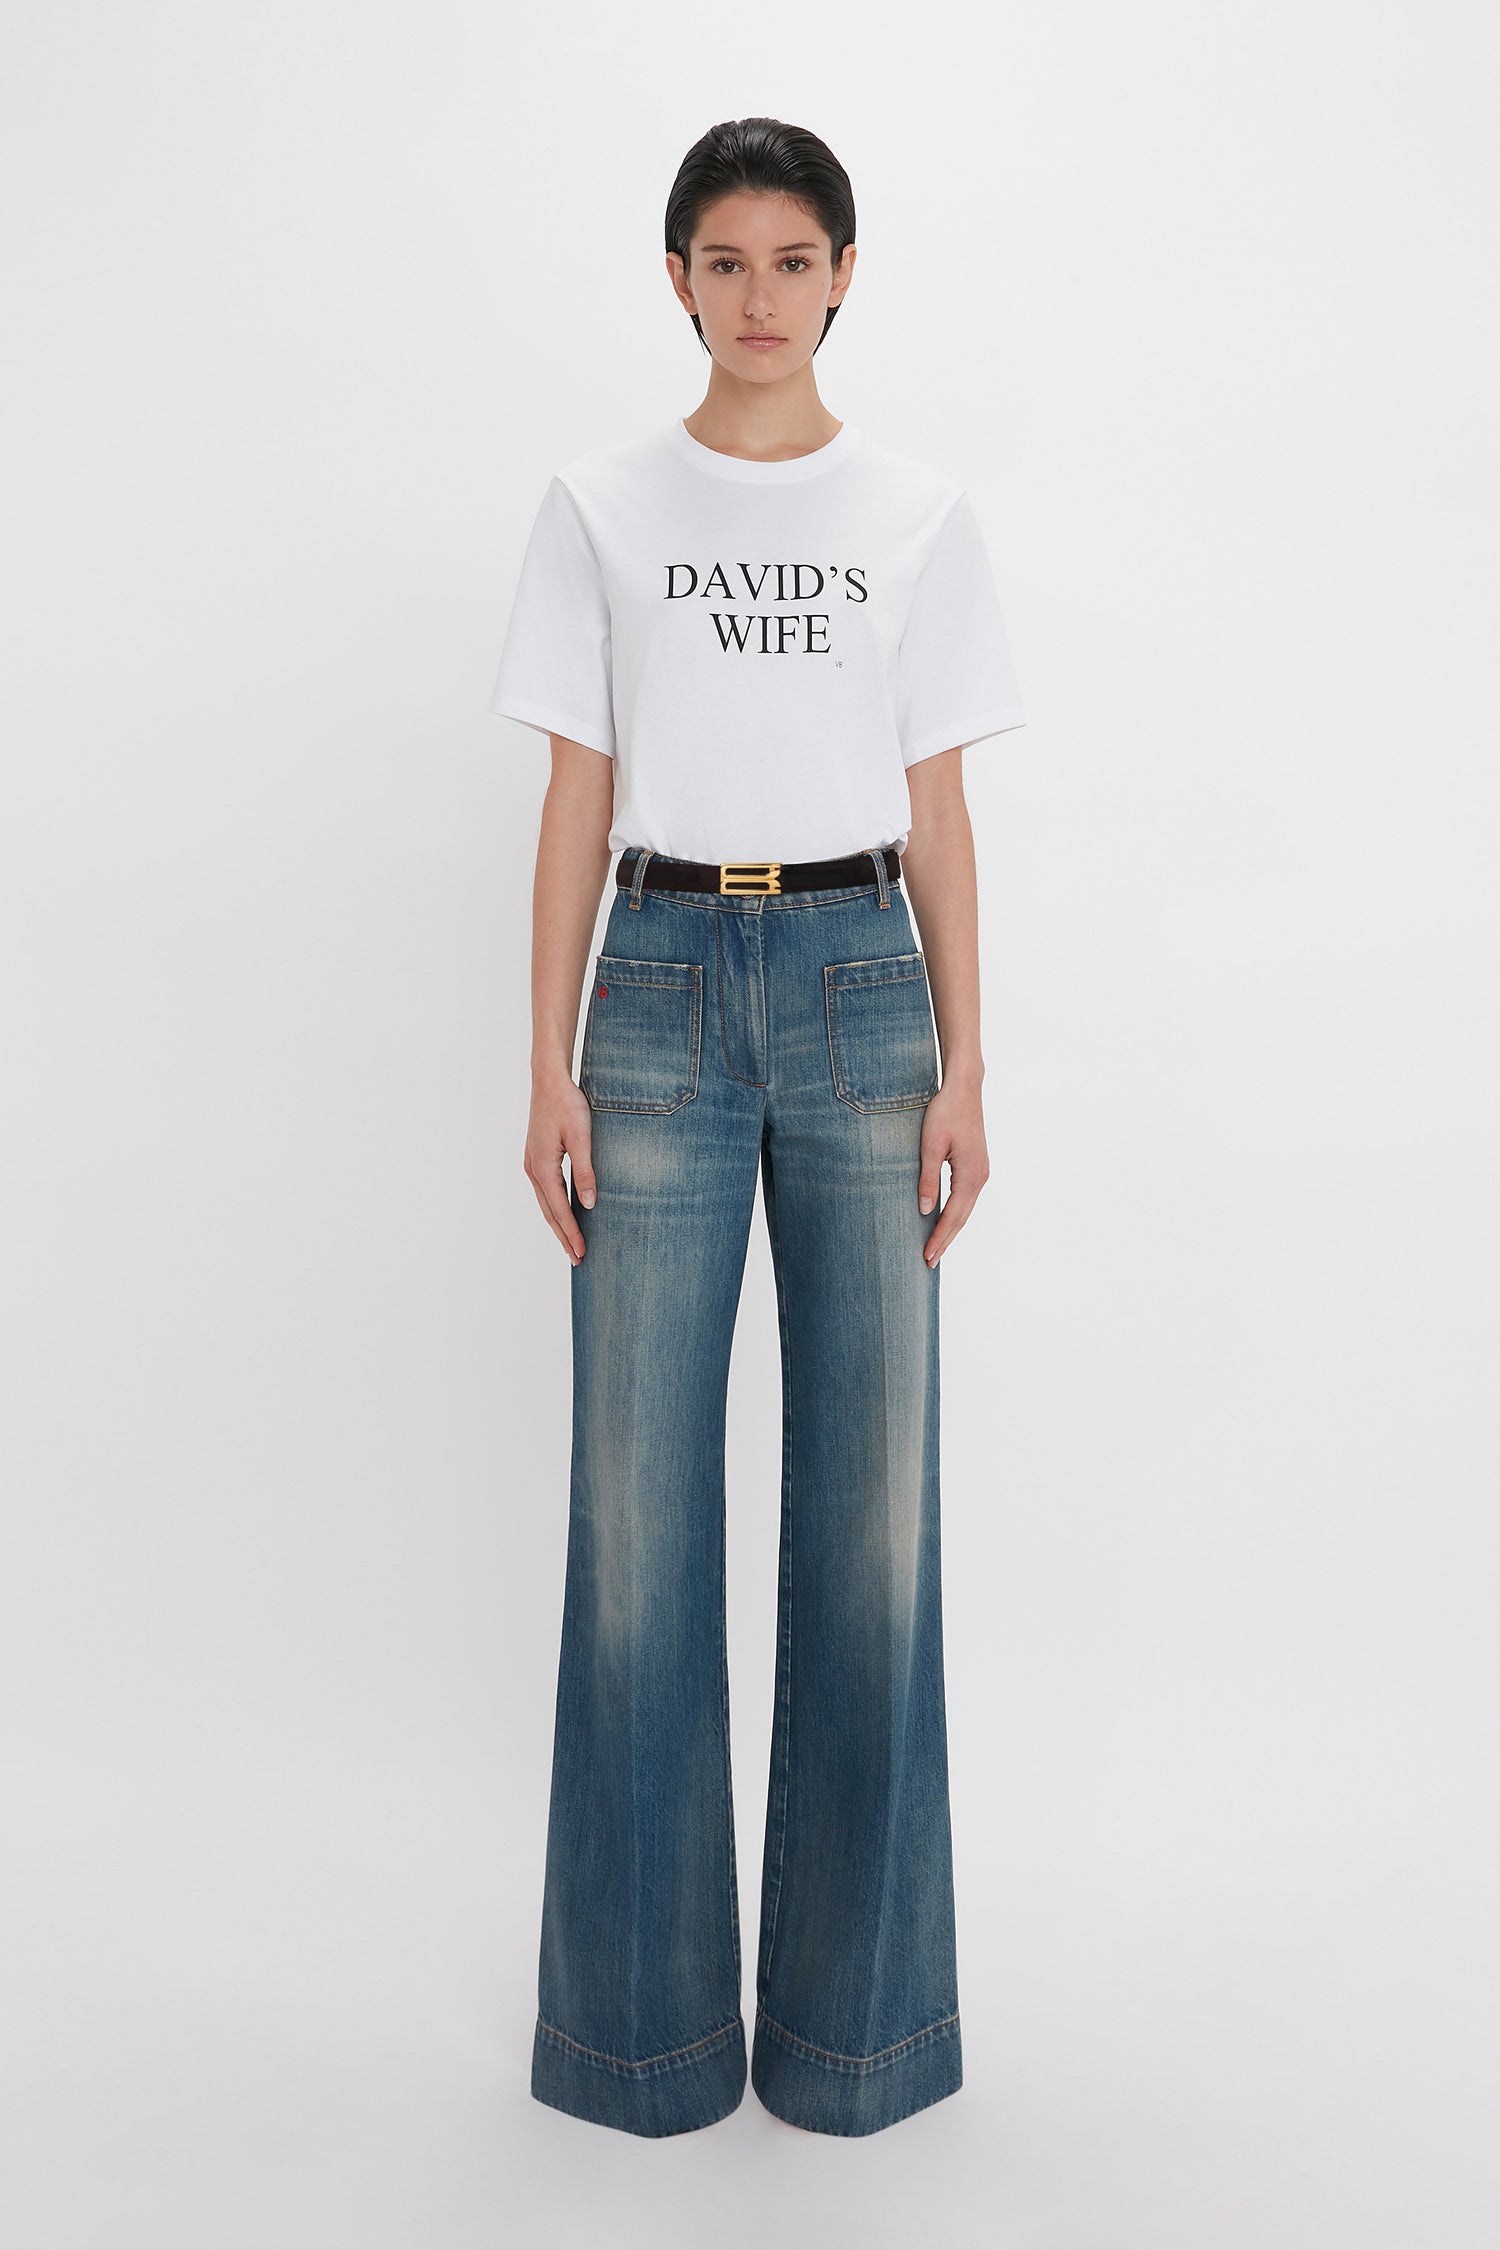 A woman in a Victoria Beckham 'David's Wife' slogan T-shirt in white and blue high-waisted jeans with a gold buckle belt, standing against a plain white background.